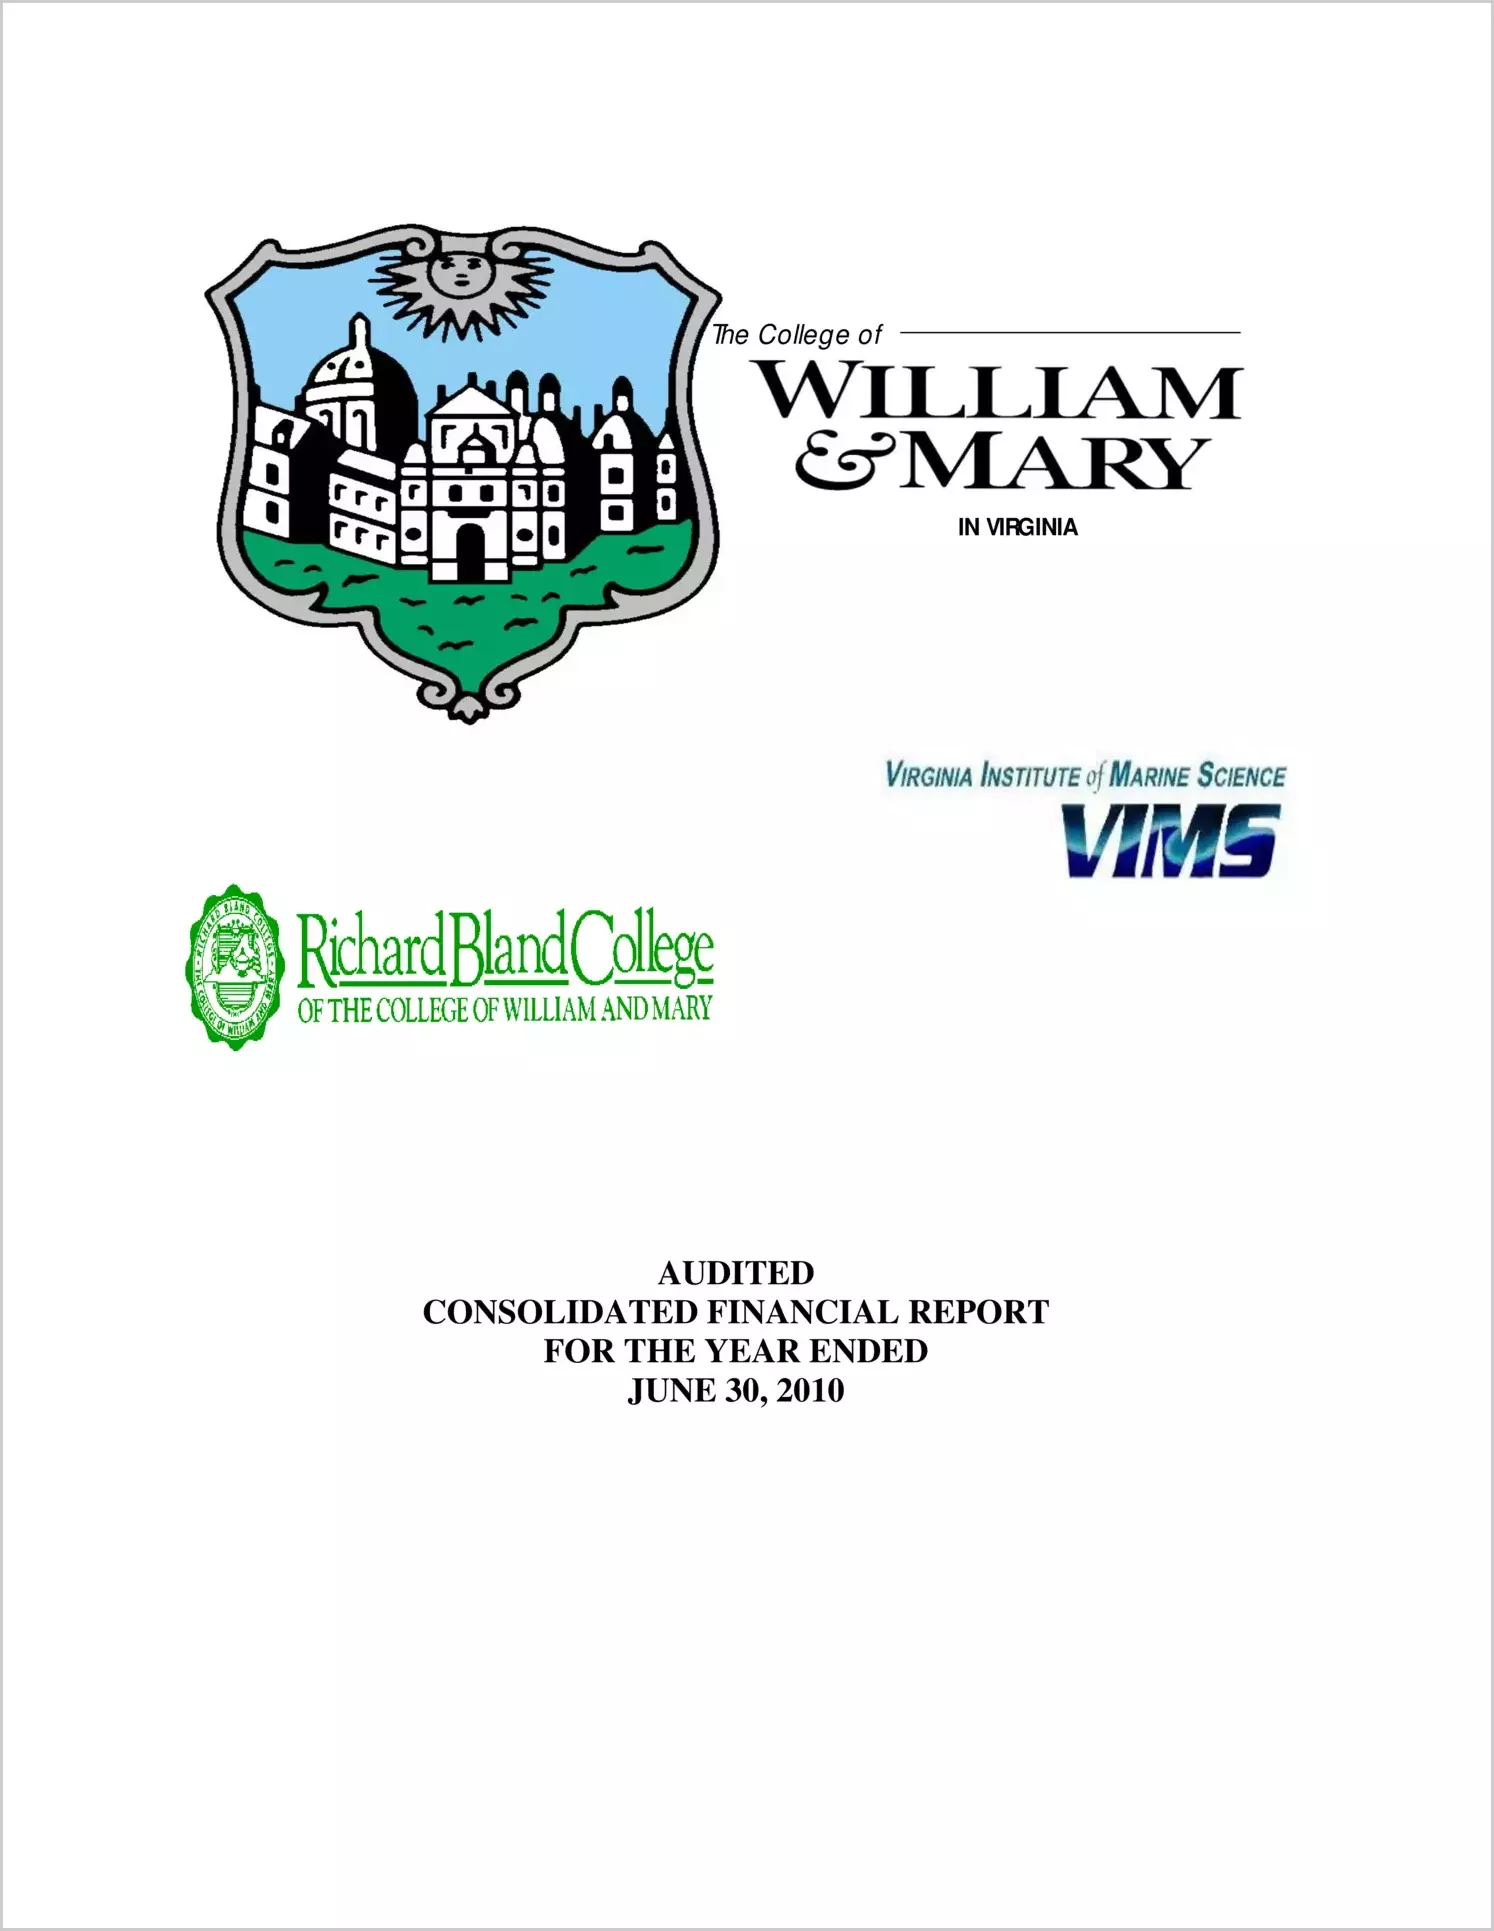 William & Mary, Virginia Institute of Marine Science, and Richard Bland College Financial Statements for the year ended June 30, 2010